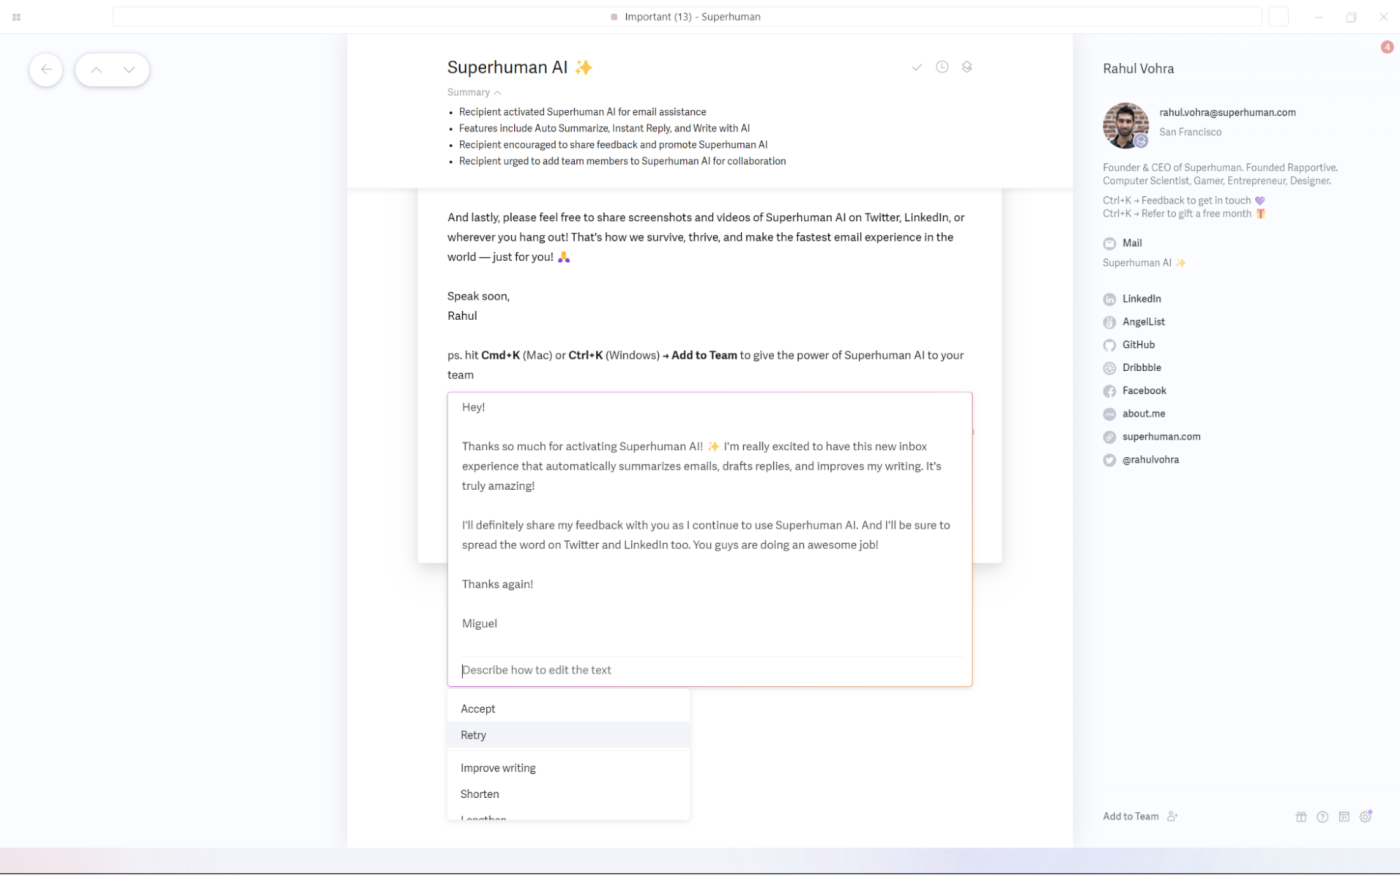 Superhuman, our pick for the best AI email assistant for keeping your inbox organized